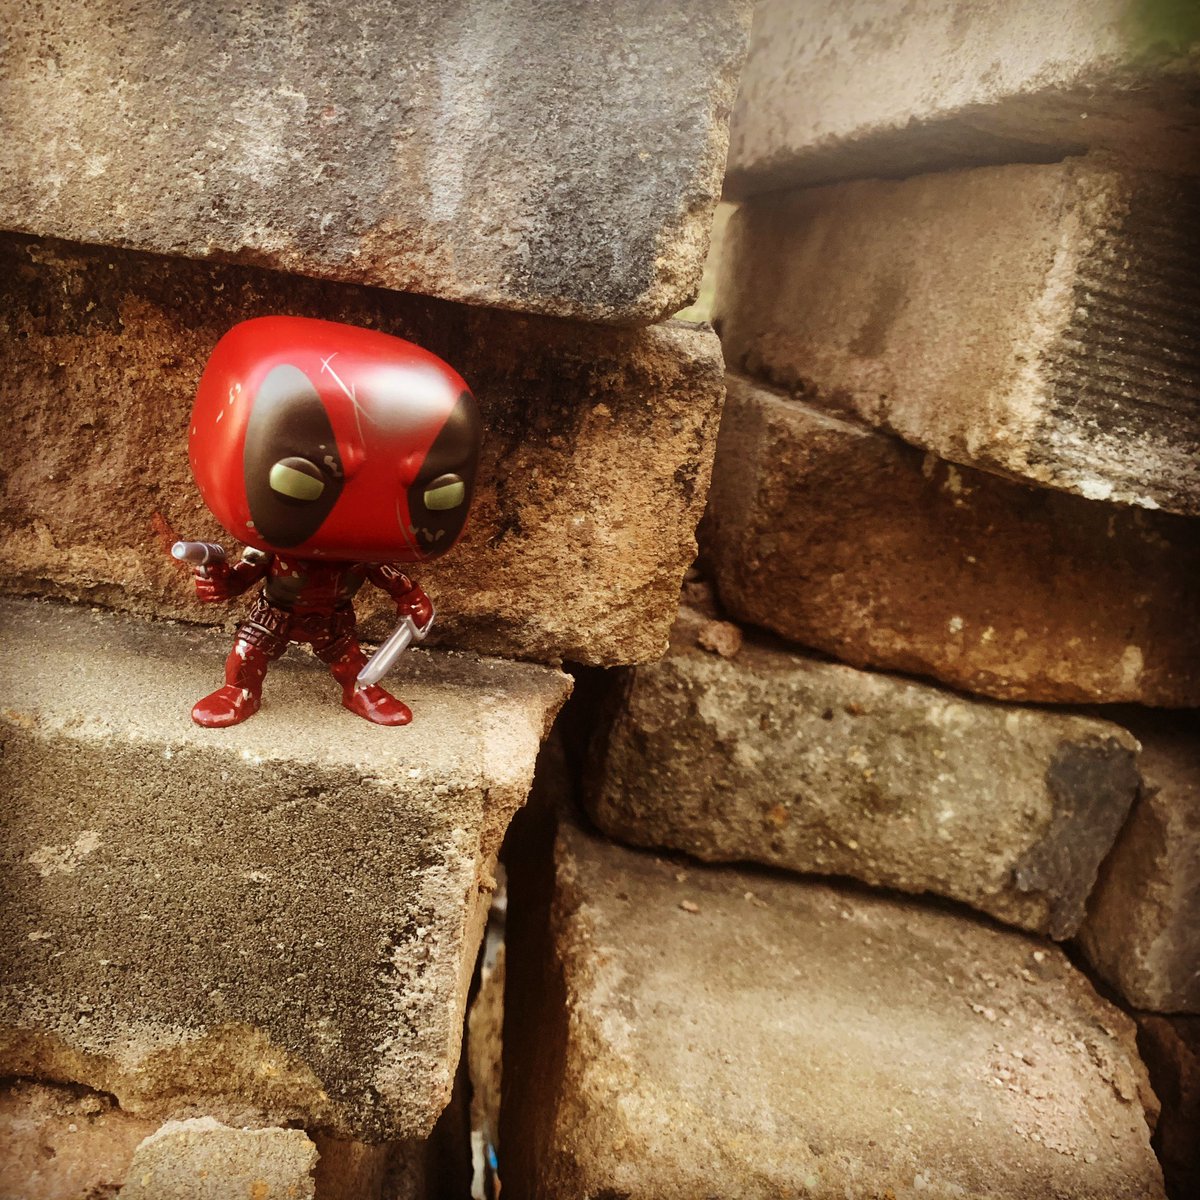 I love this Deadpool! I need to do more shots with him! #jerseyfunkocollectors #funaticoftheweek #myfunkostory